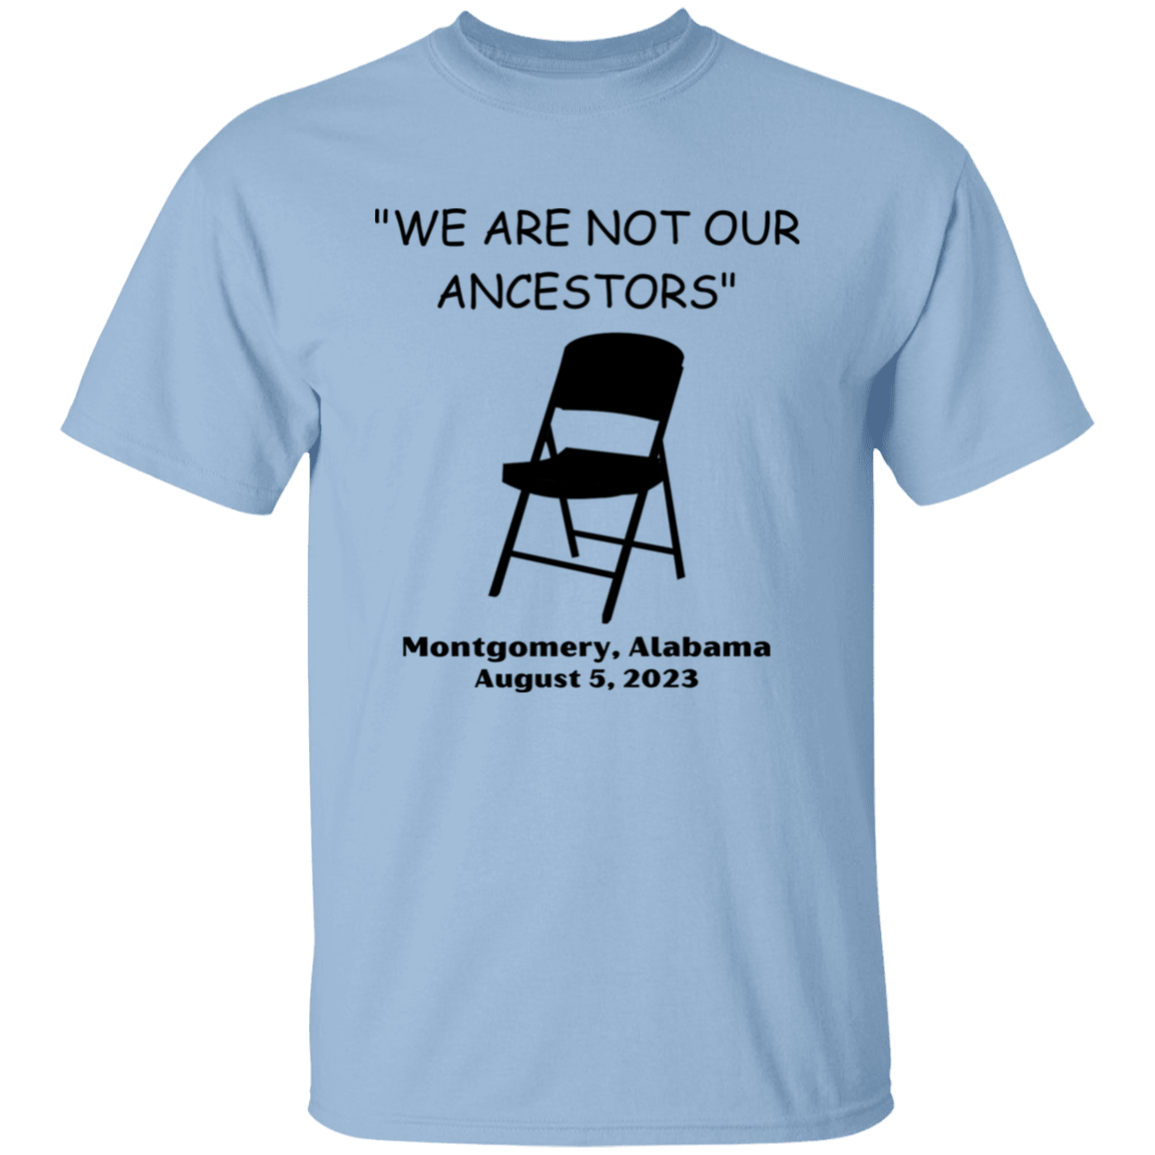 We are not our ancestors T-Shirt